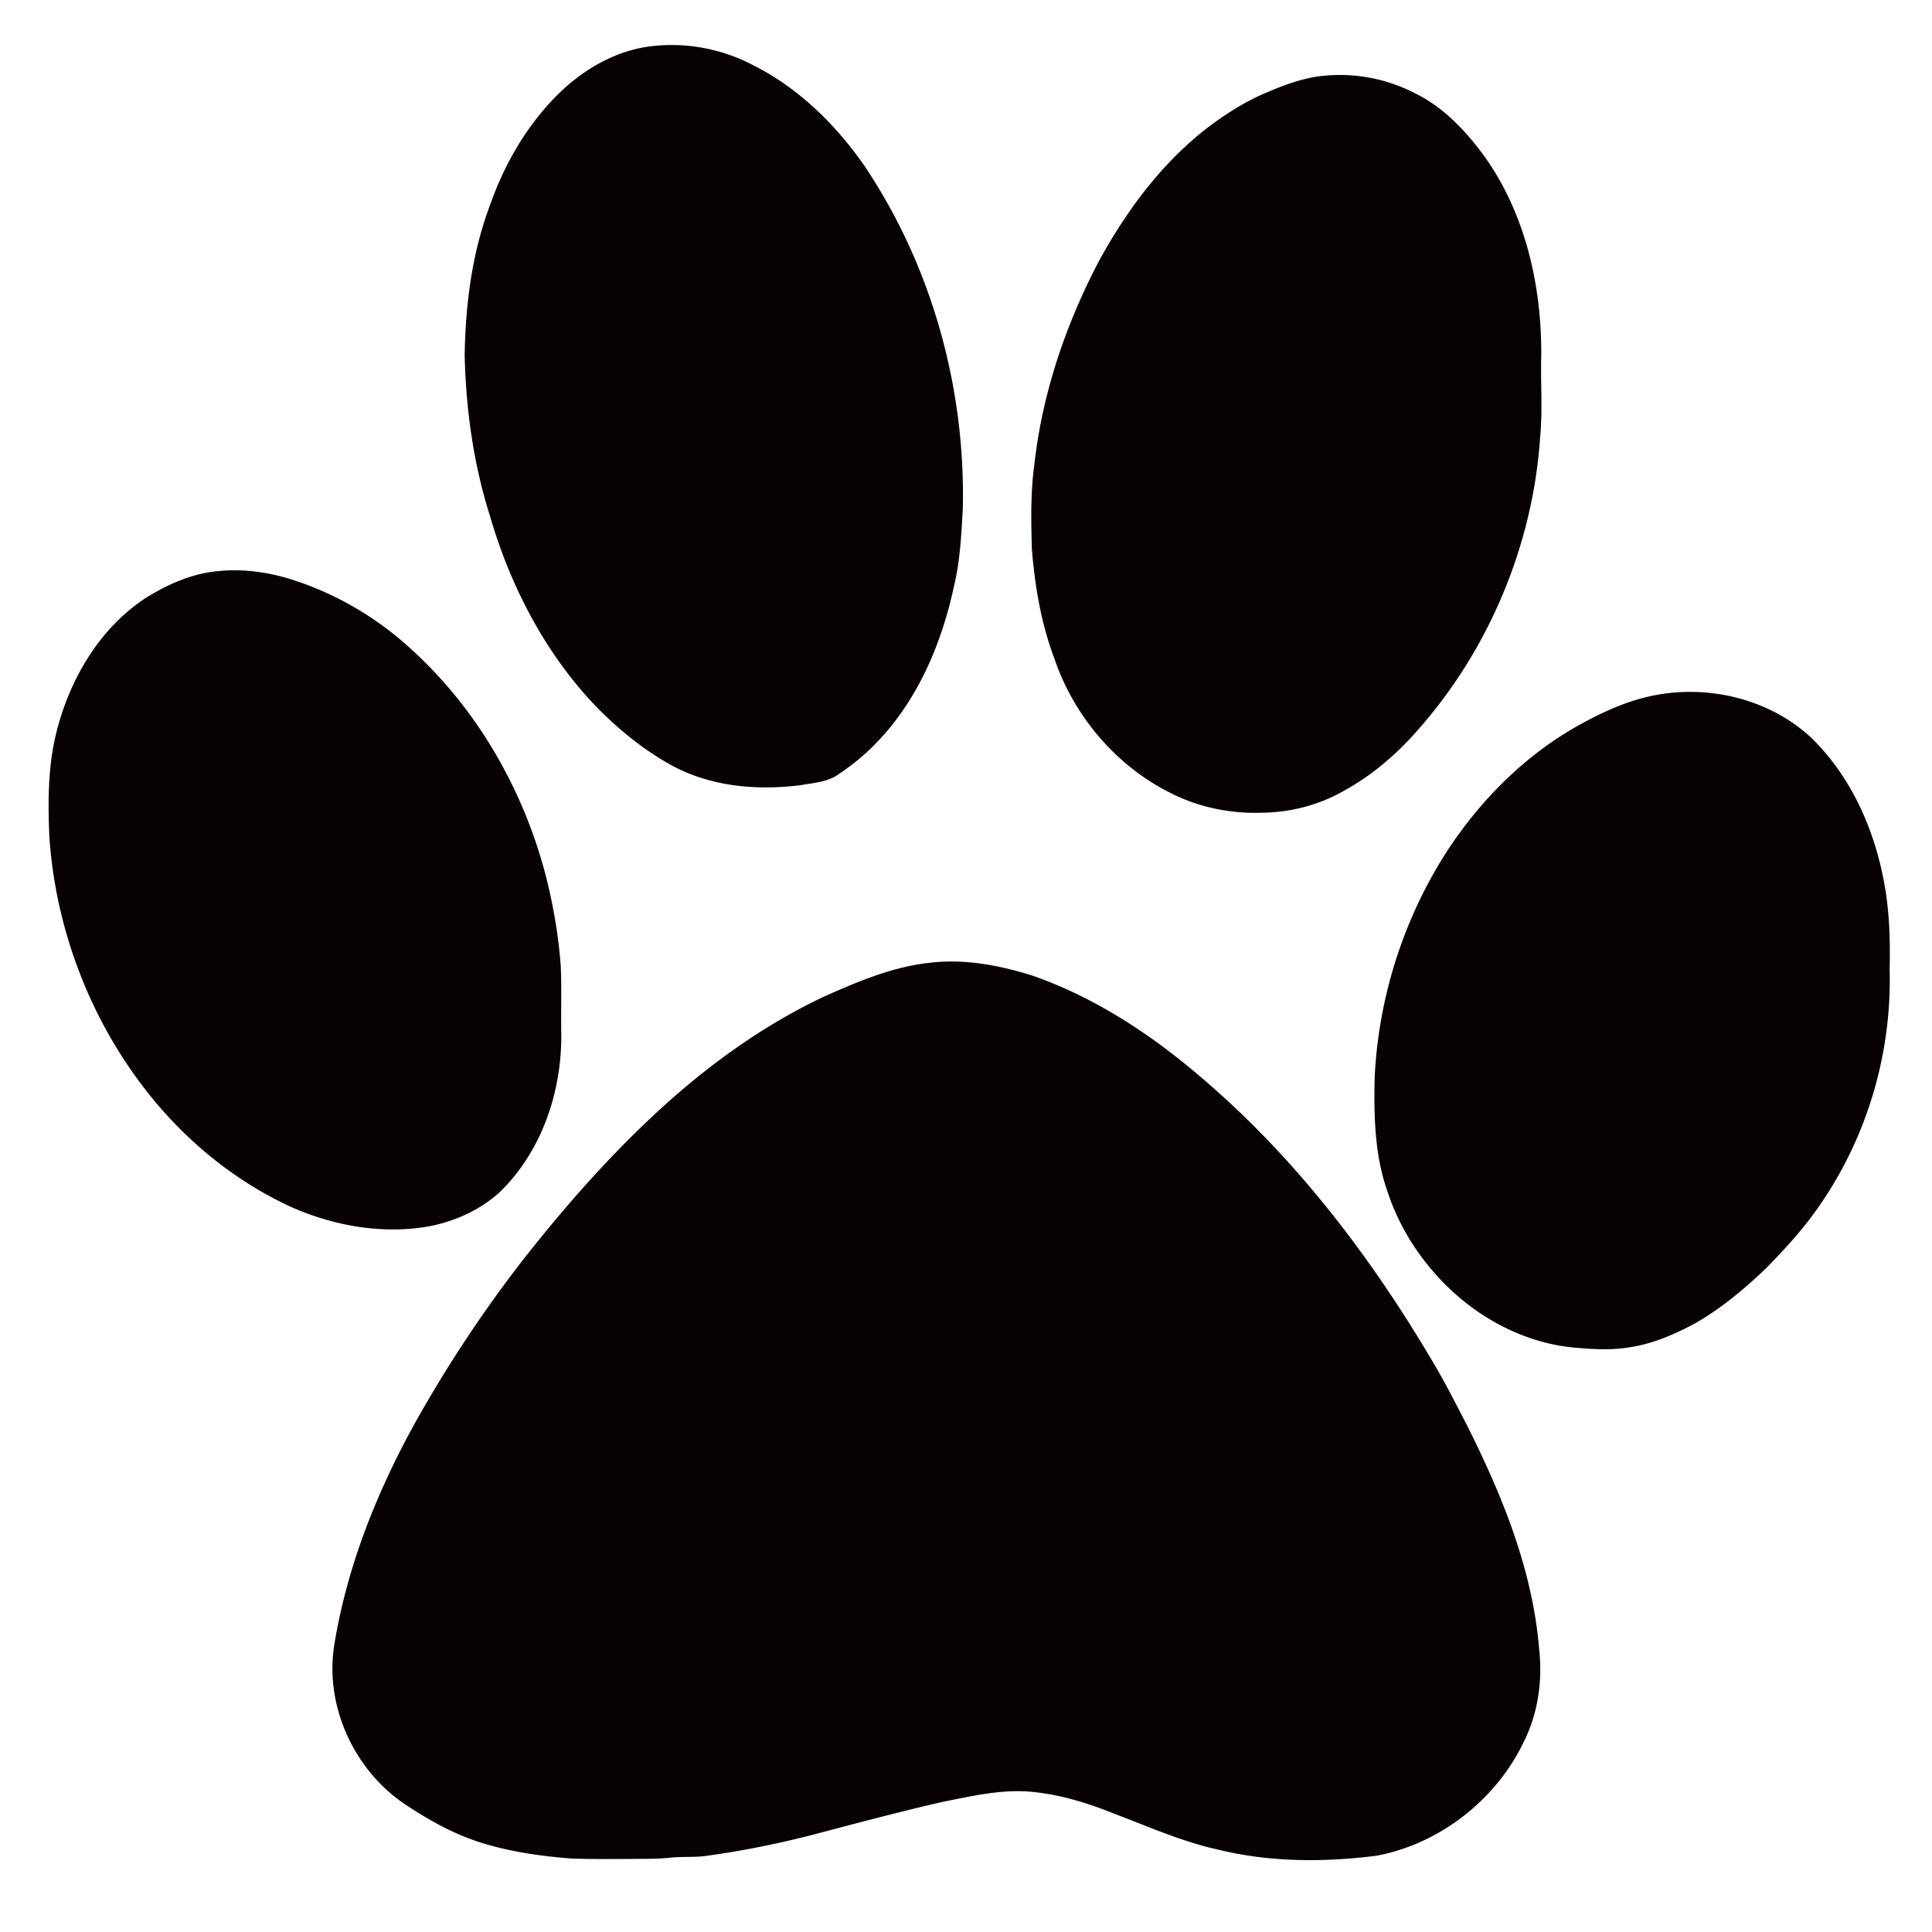 Dog paw print vector free Fre